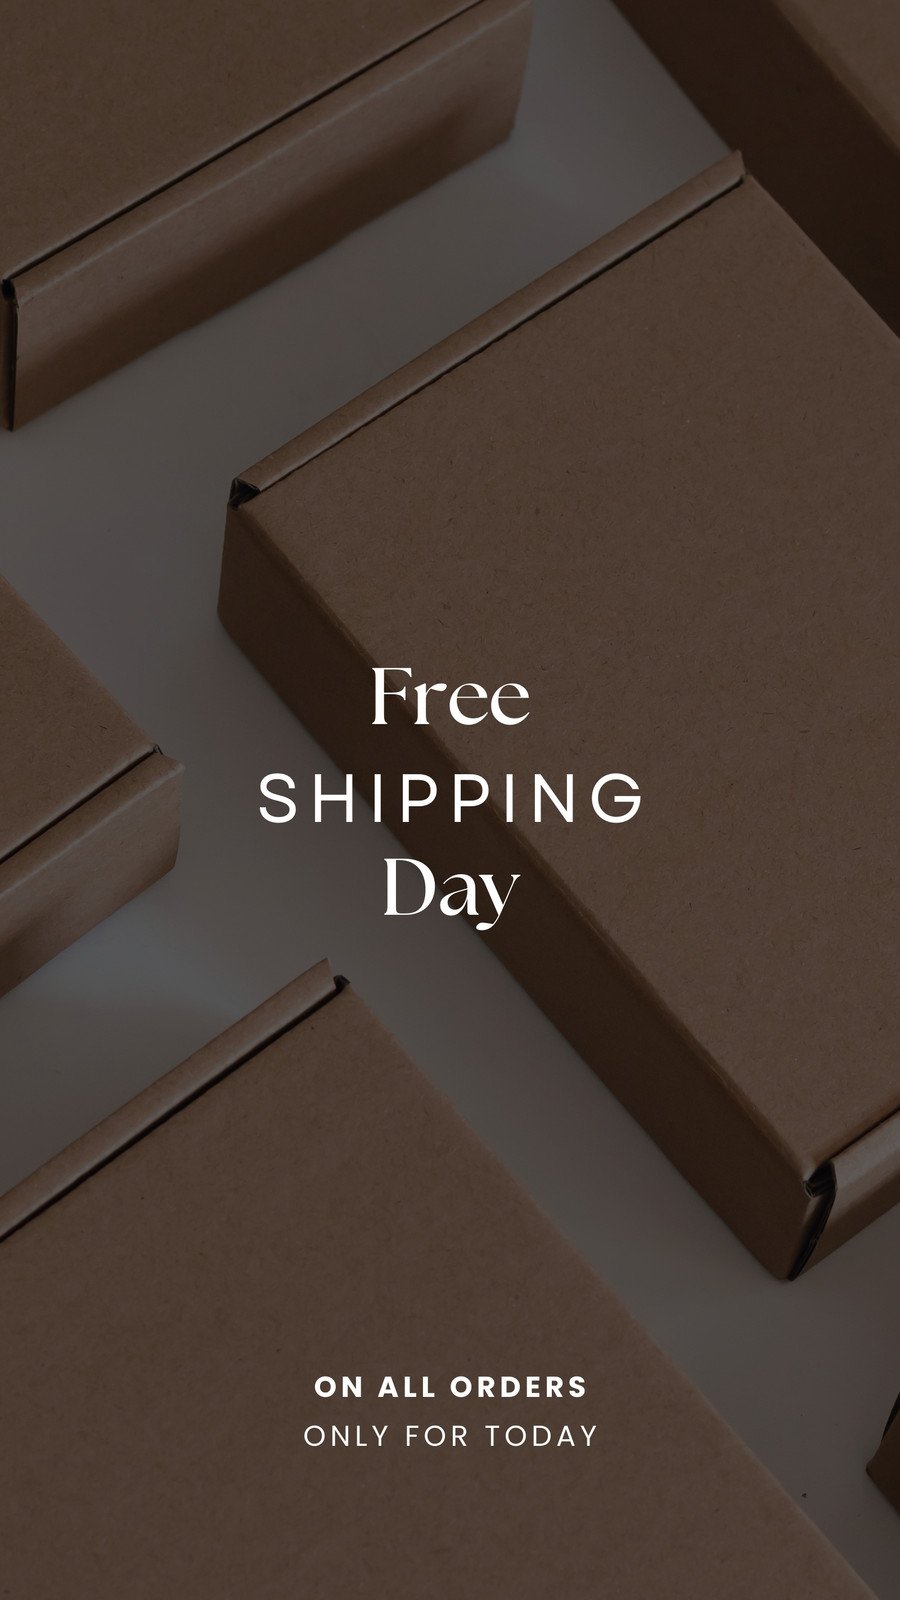 Free Shipping On All Orders, Shipping Information